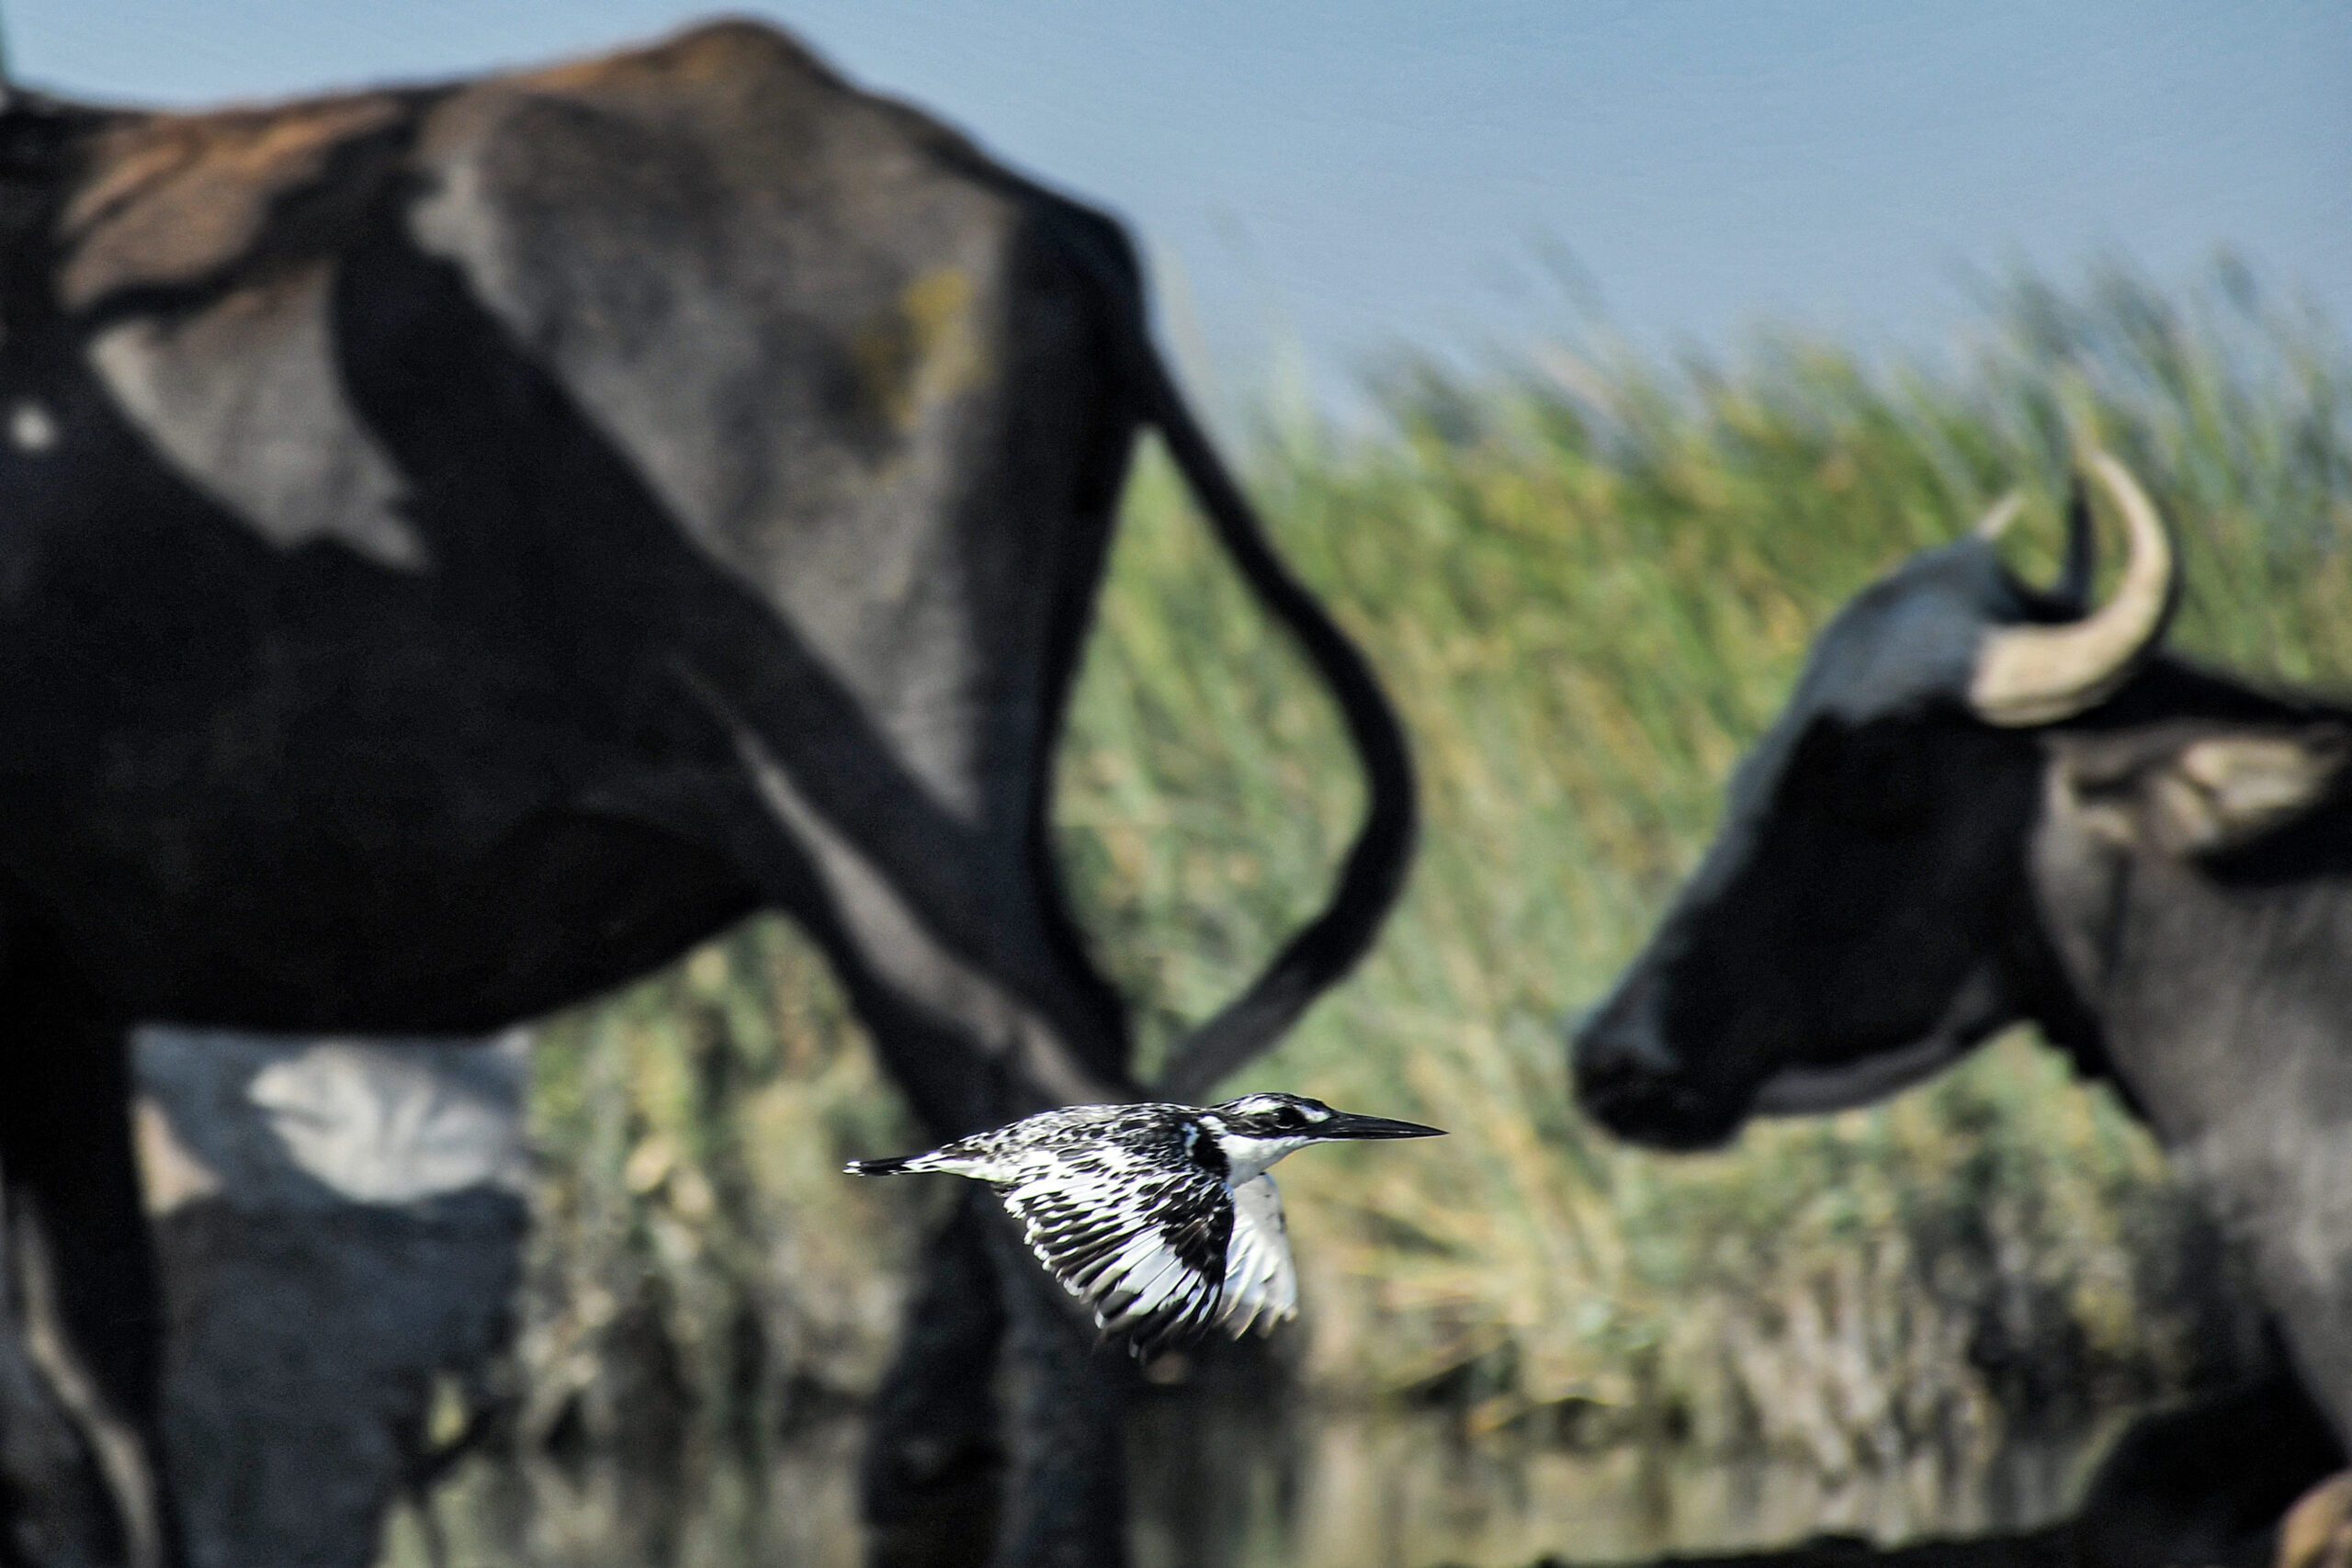 A black and white bird in mid-flight with buffalos behind